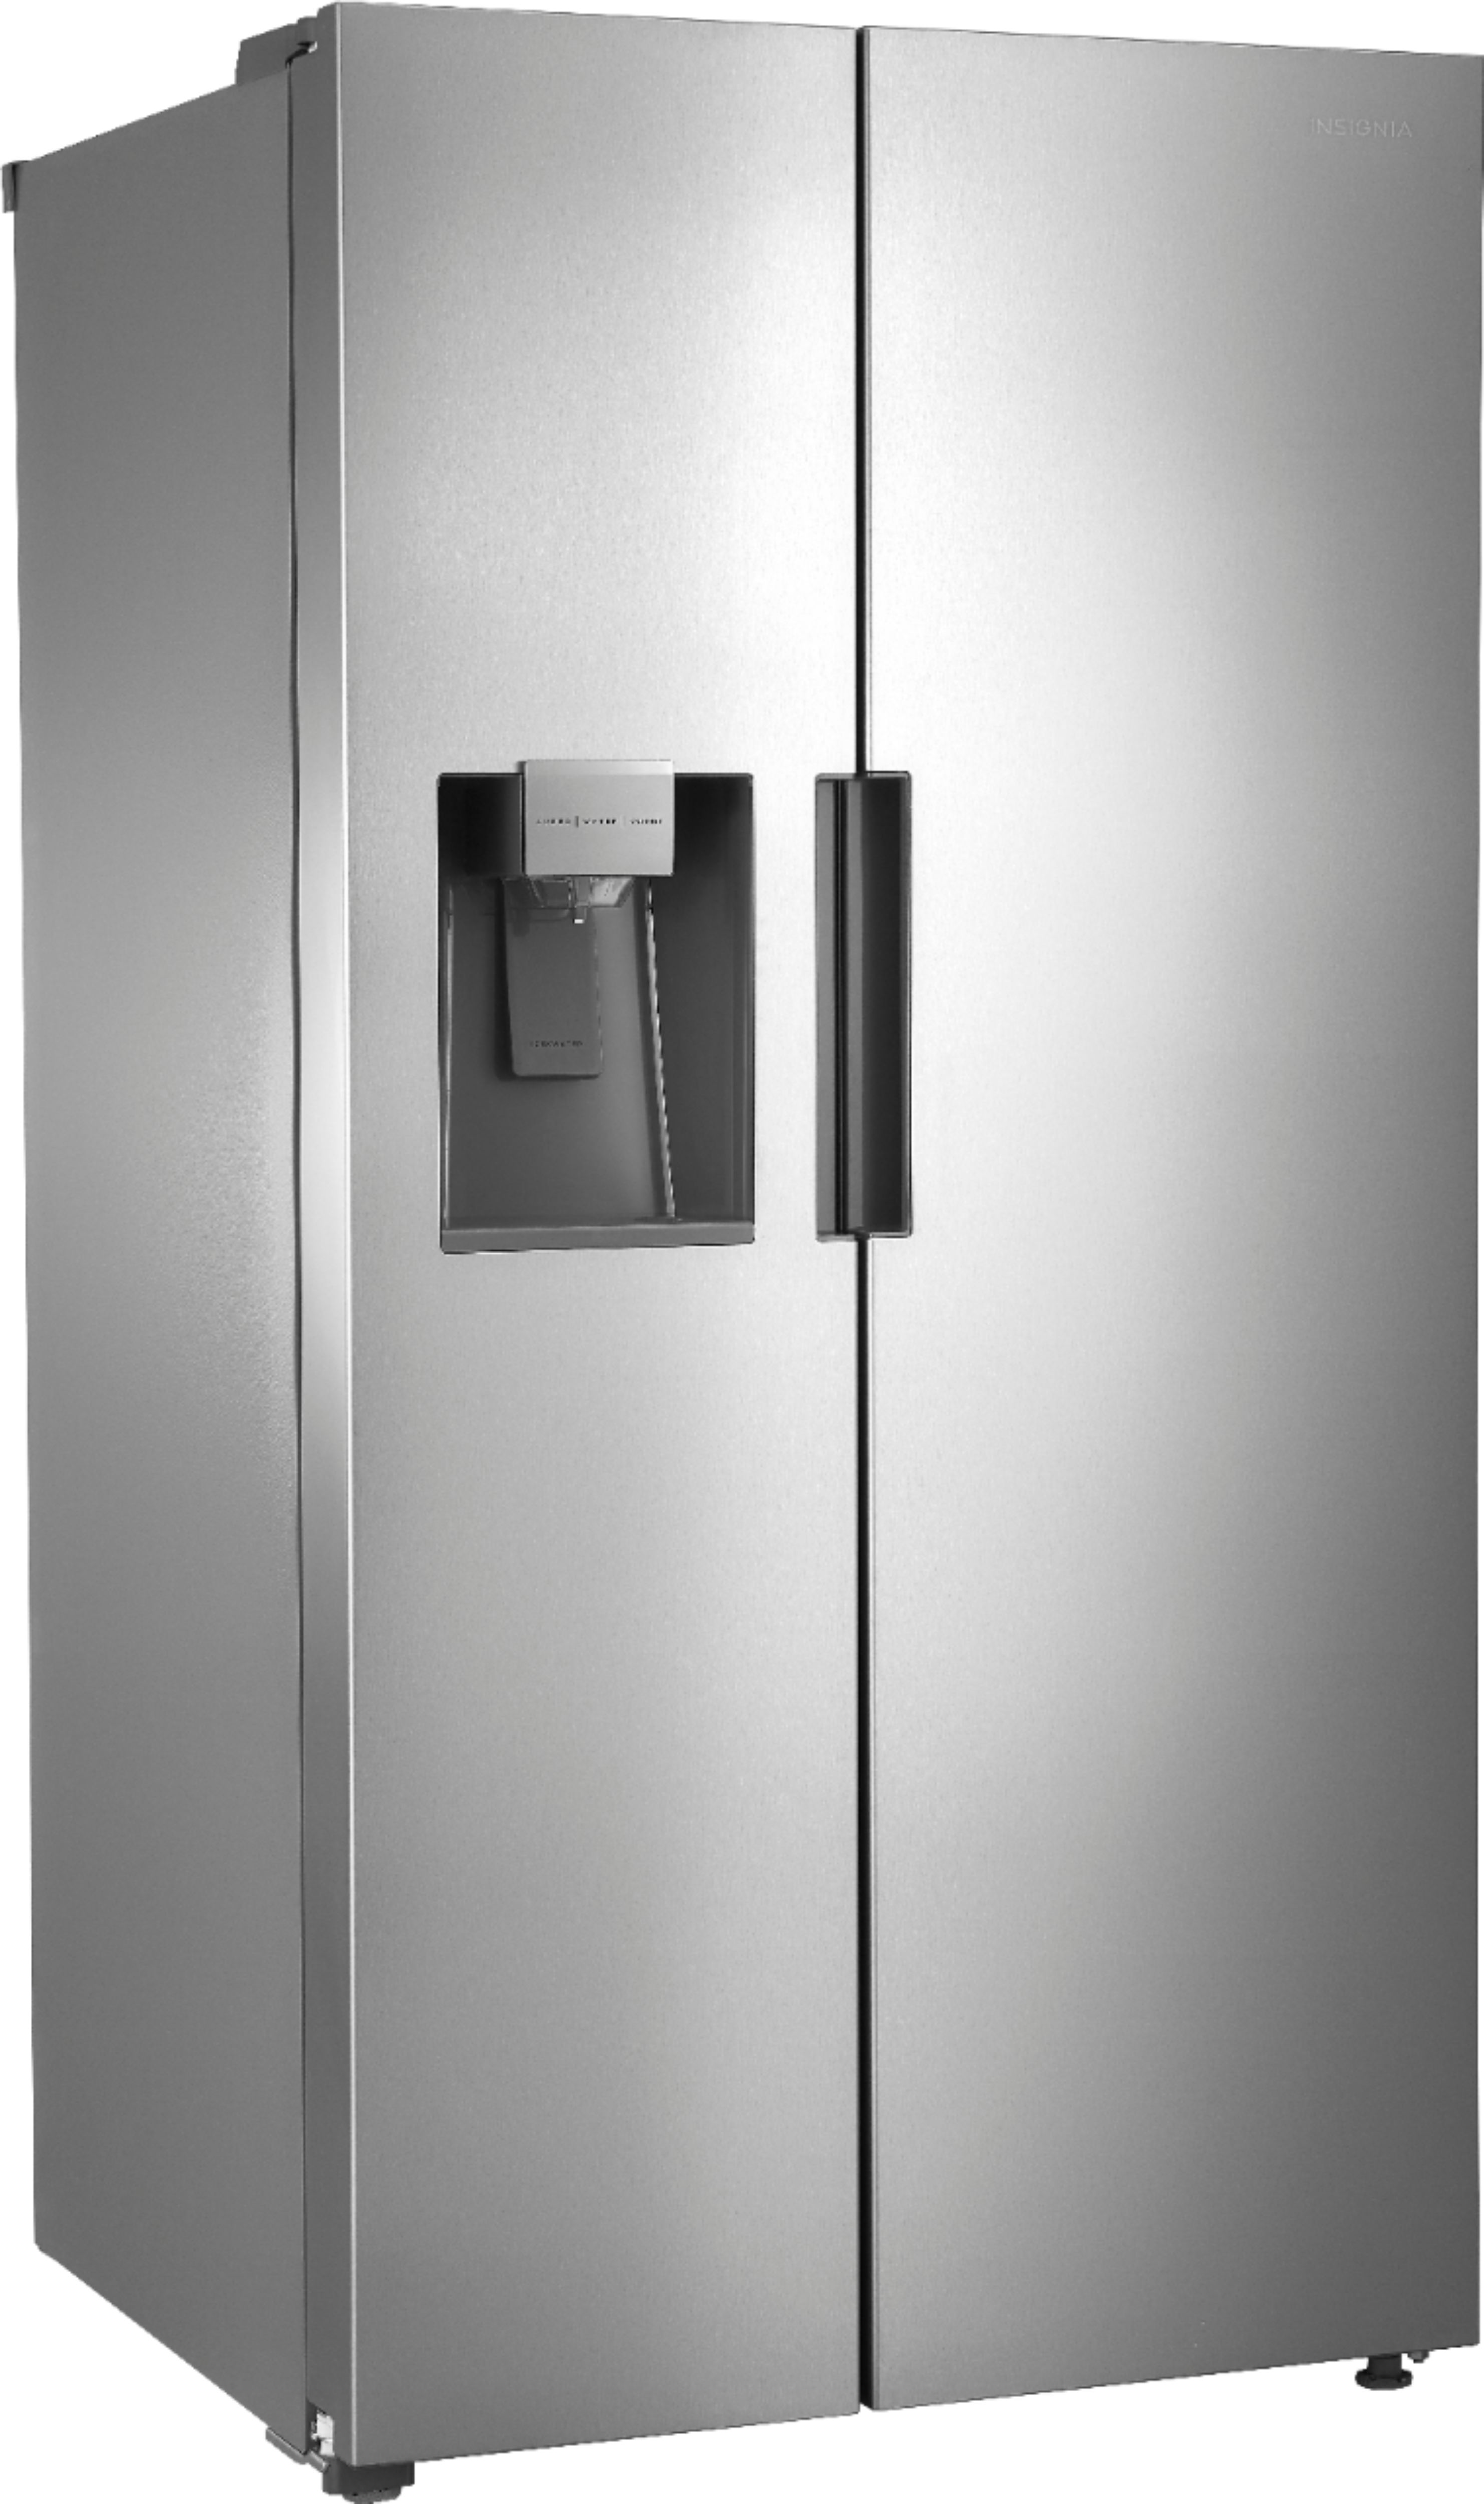 Angle View: Viking - Professional 7 Series 13 Cu. Ft. Built-In Refrigerator - Pacific gray